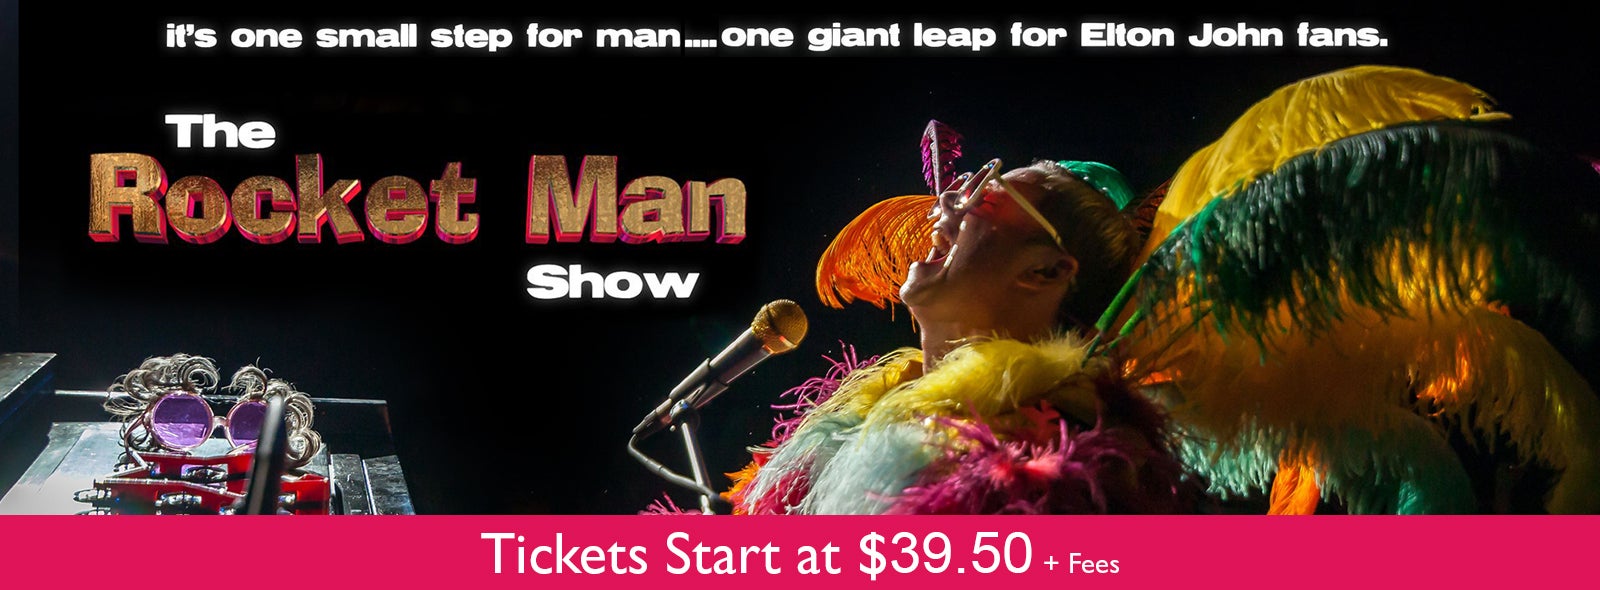 The Rocket Man Show Tribute To Elton John Dpac Official Site